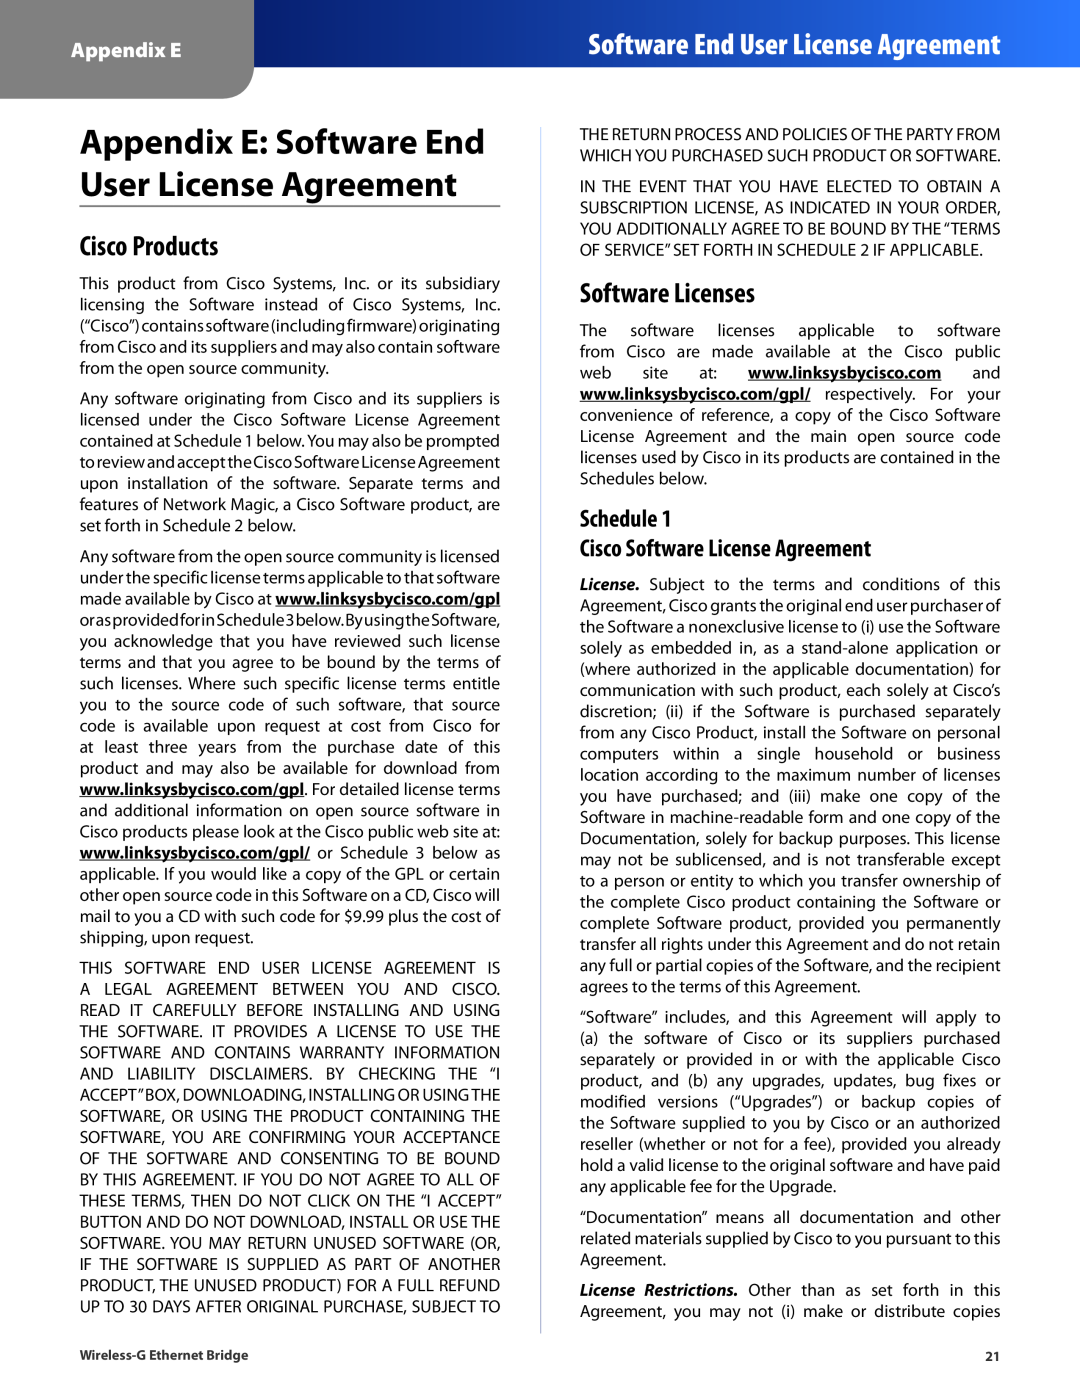 Cisco Systems WET54G manual Appendix E Software End User License Agreement, Cisco Products, Software Licenses 